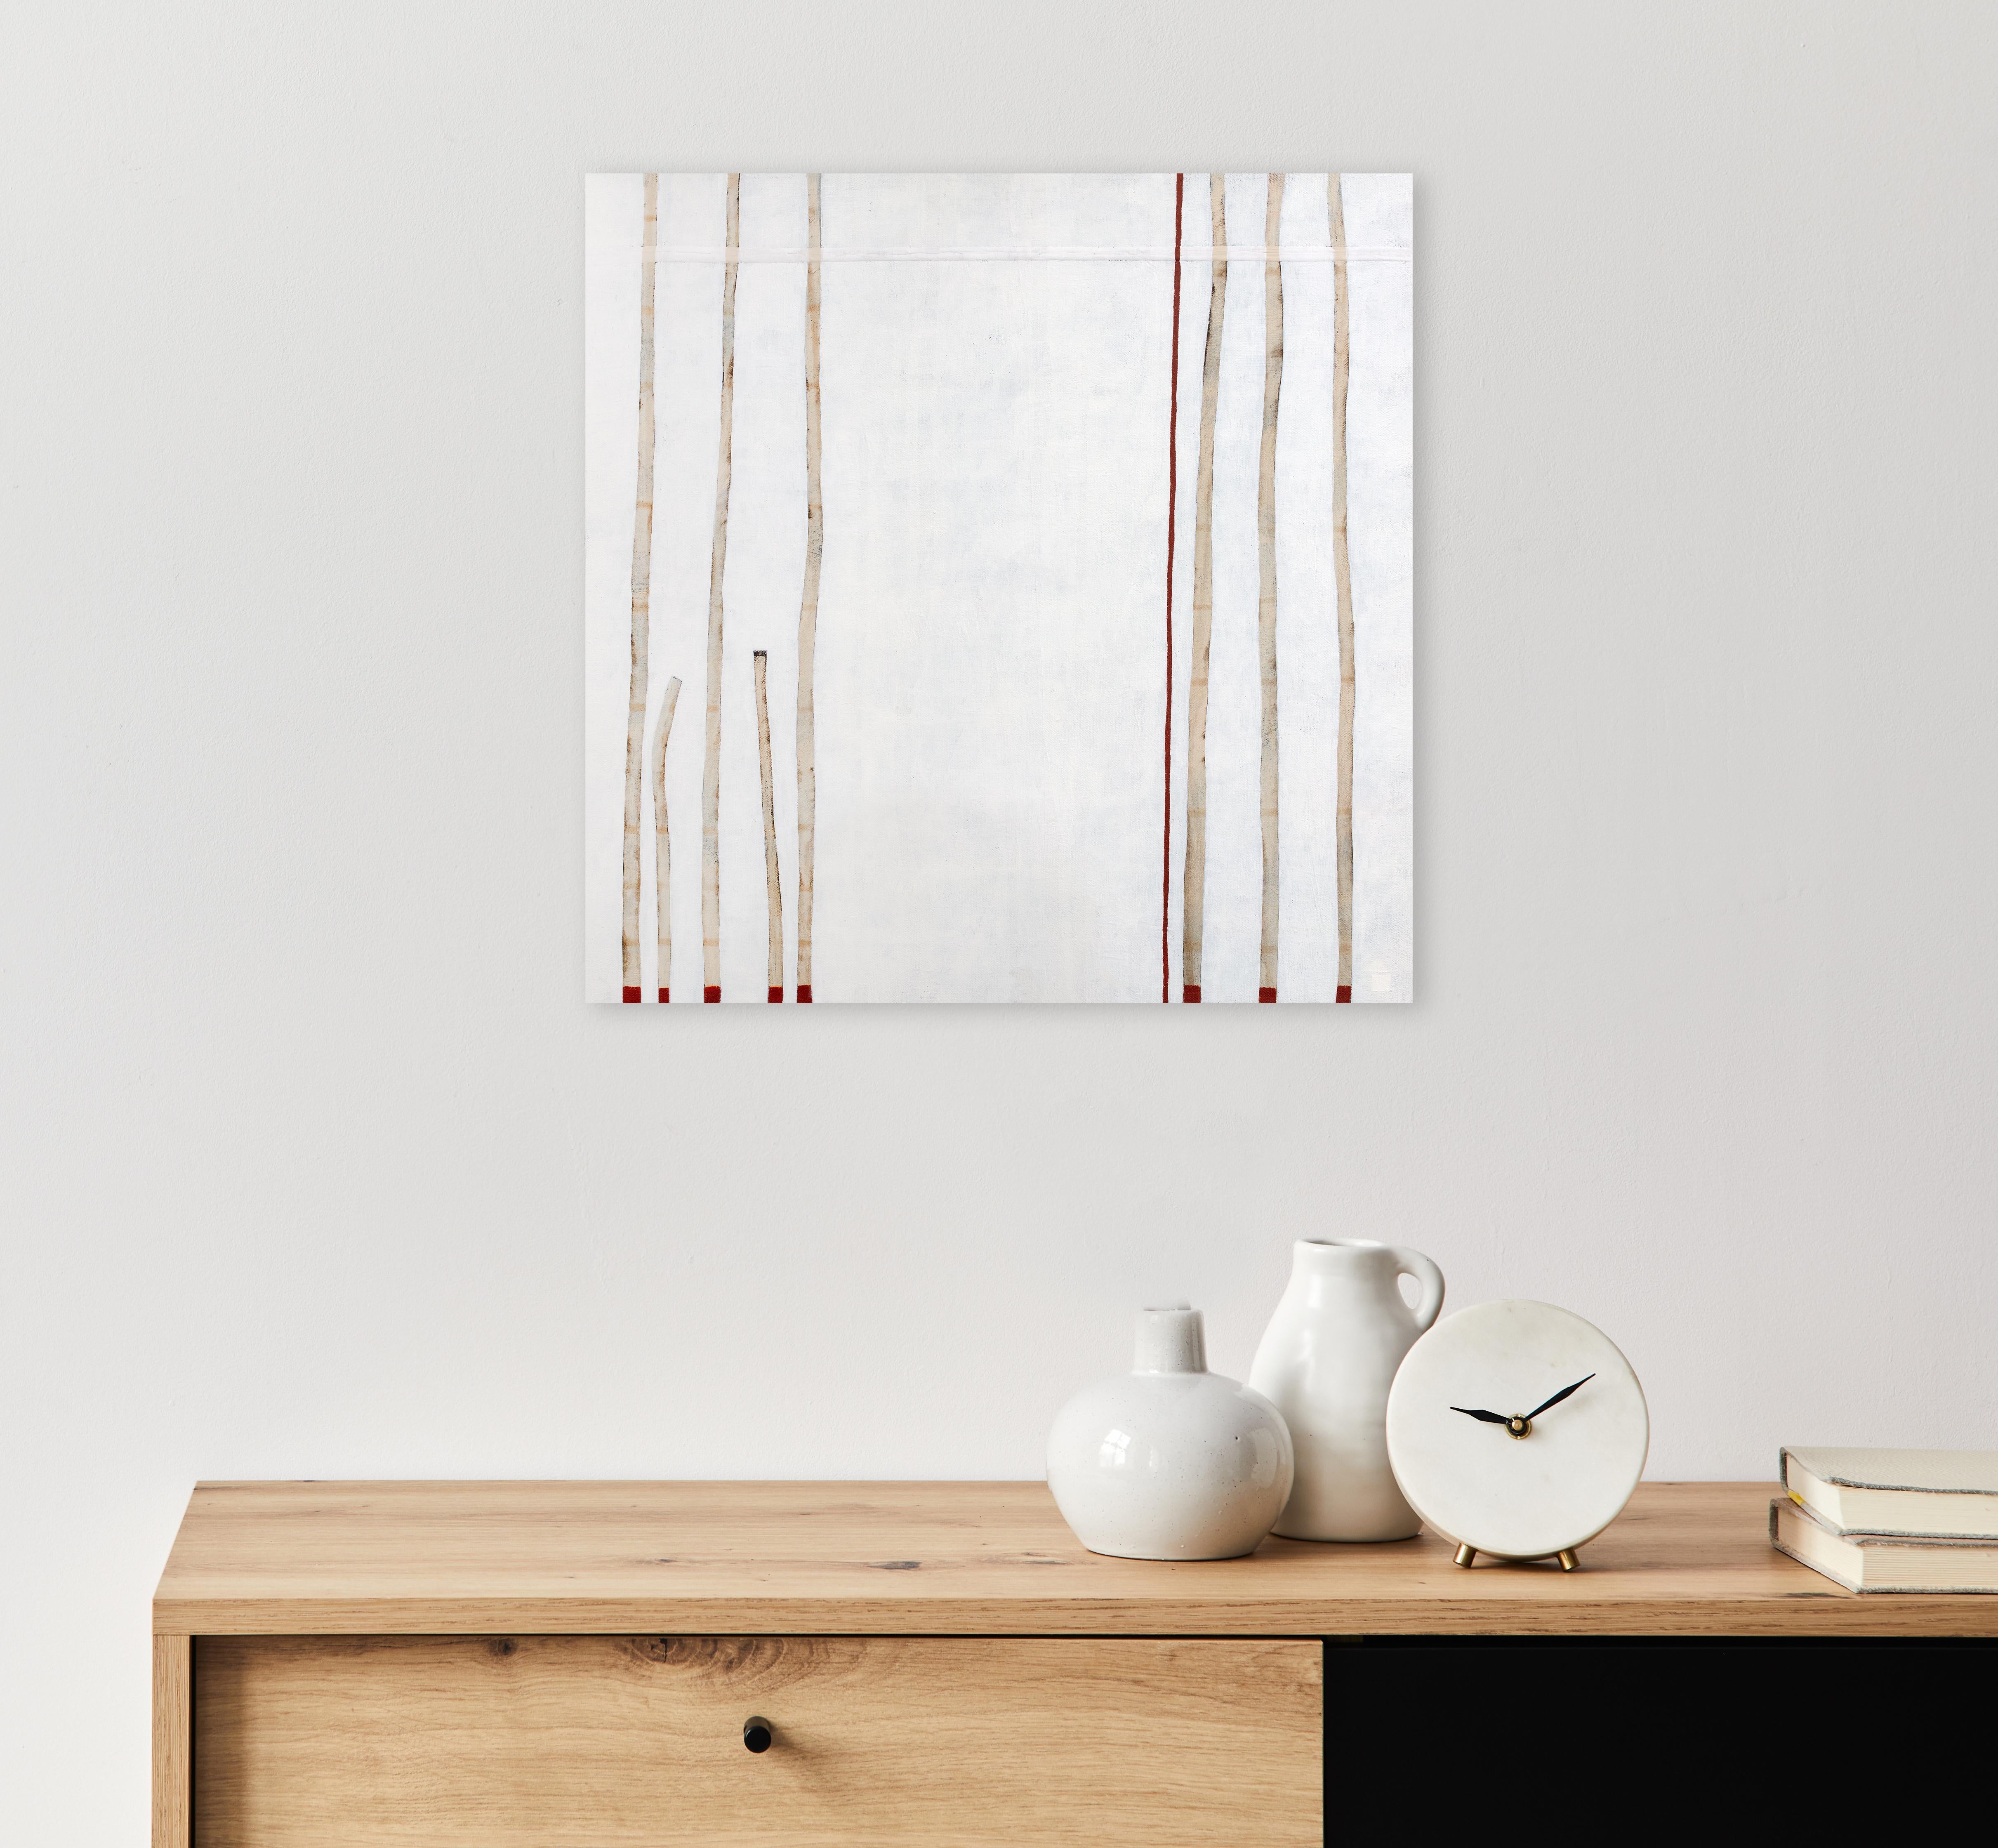 This abstract minimalistic painting by Sofie Swann features a warm neutral palette. In it, organic, imperfect light beige rectangles extend up from smaller, deep red squares at the bottom of the composition. They reach the top toward the top of the